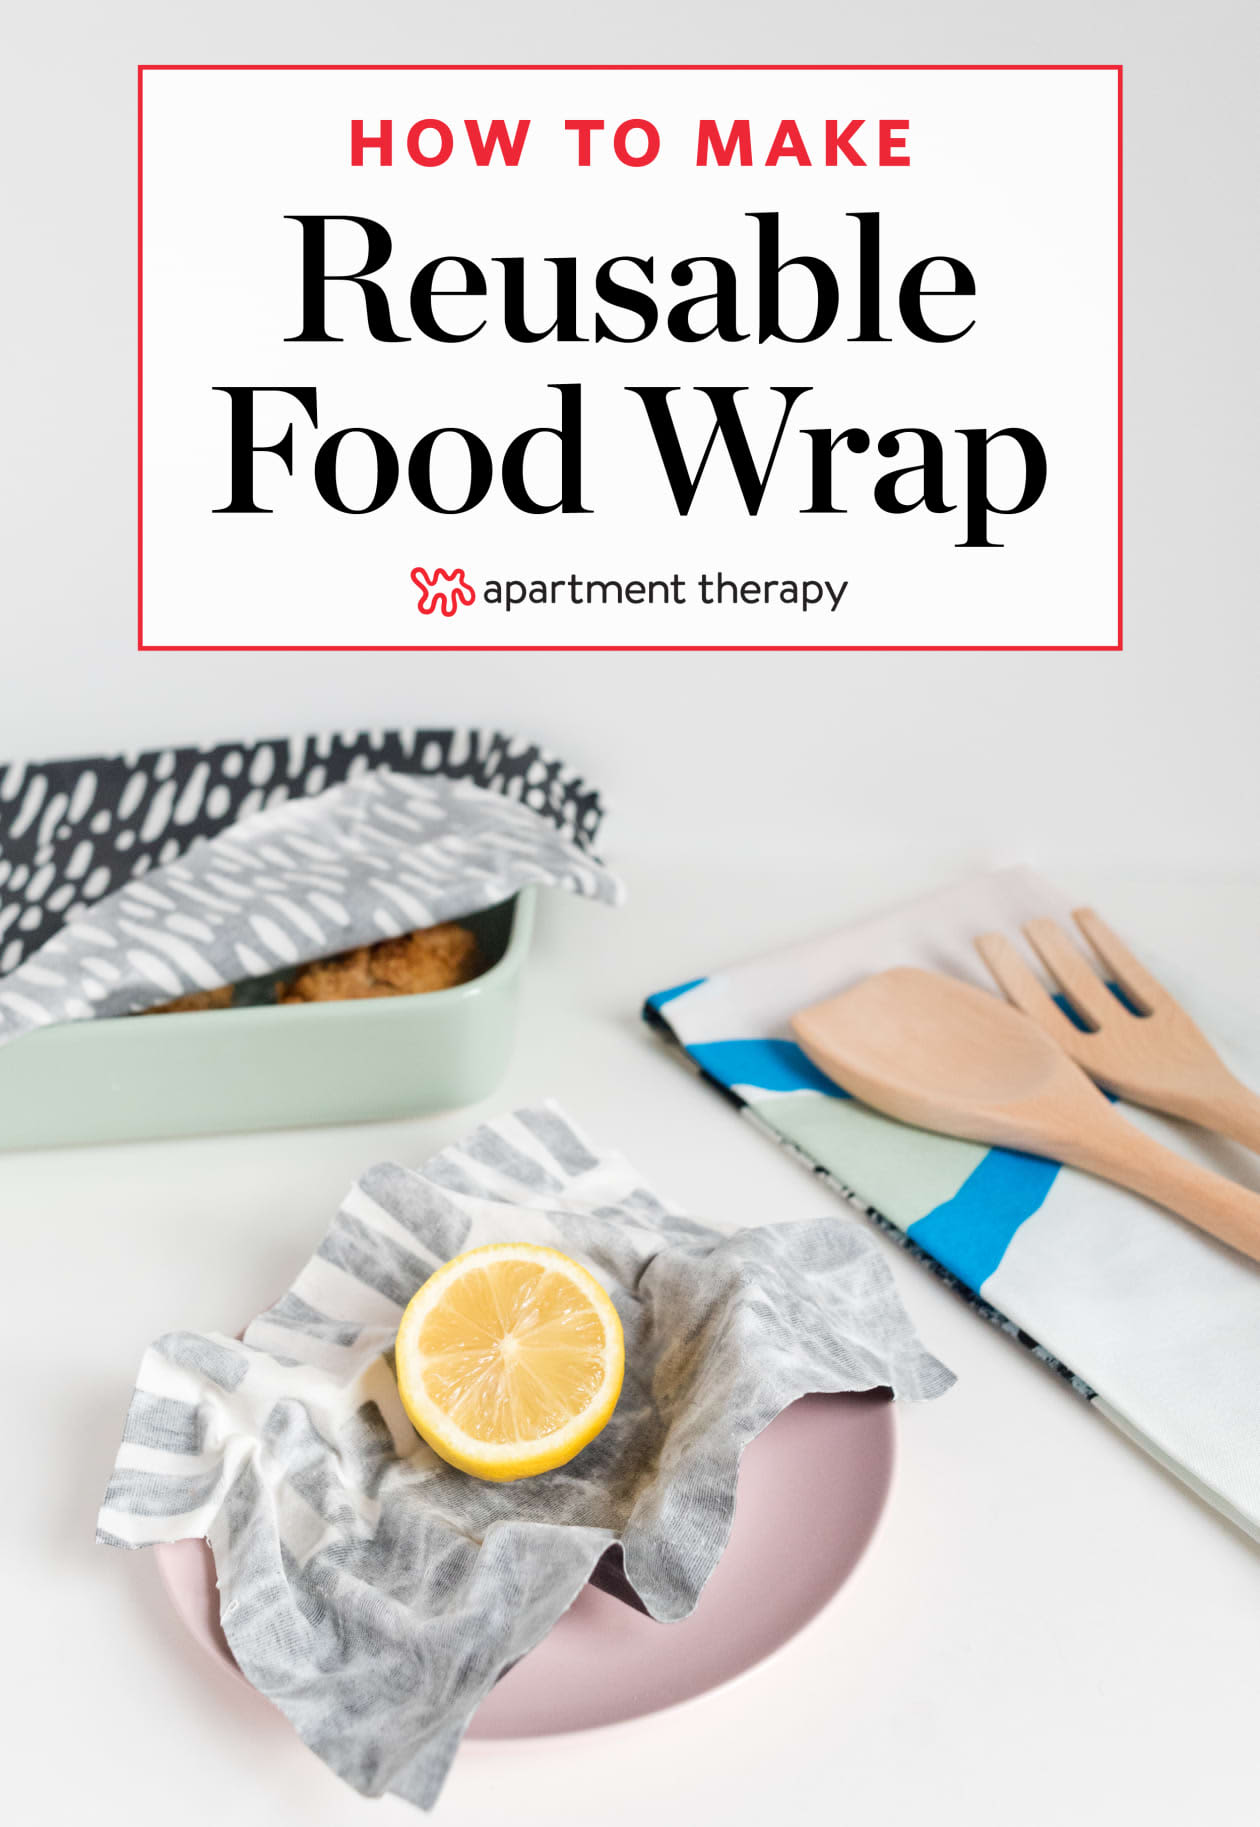 Reusable Beeswax Food Wraps - a Photo Tutorial and group project